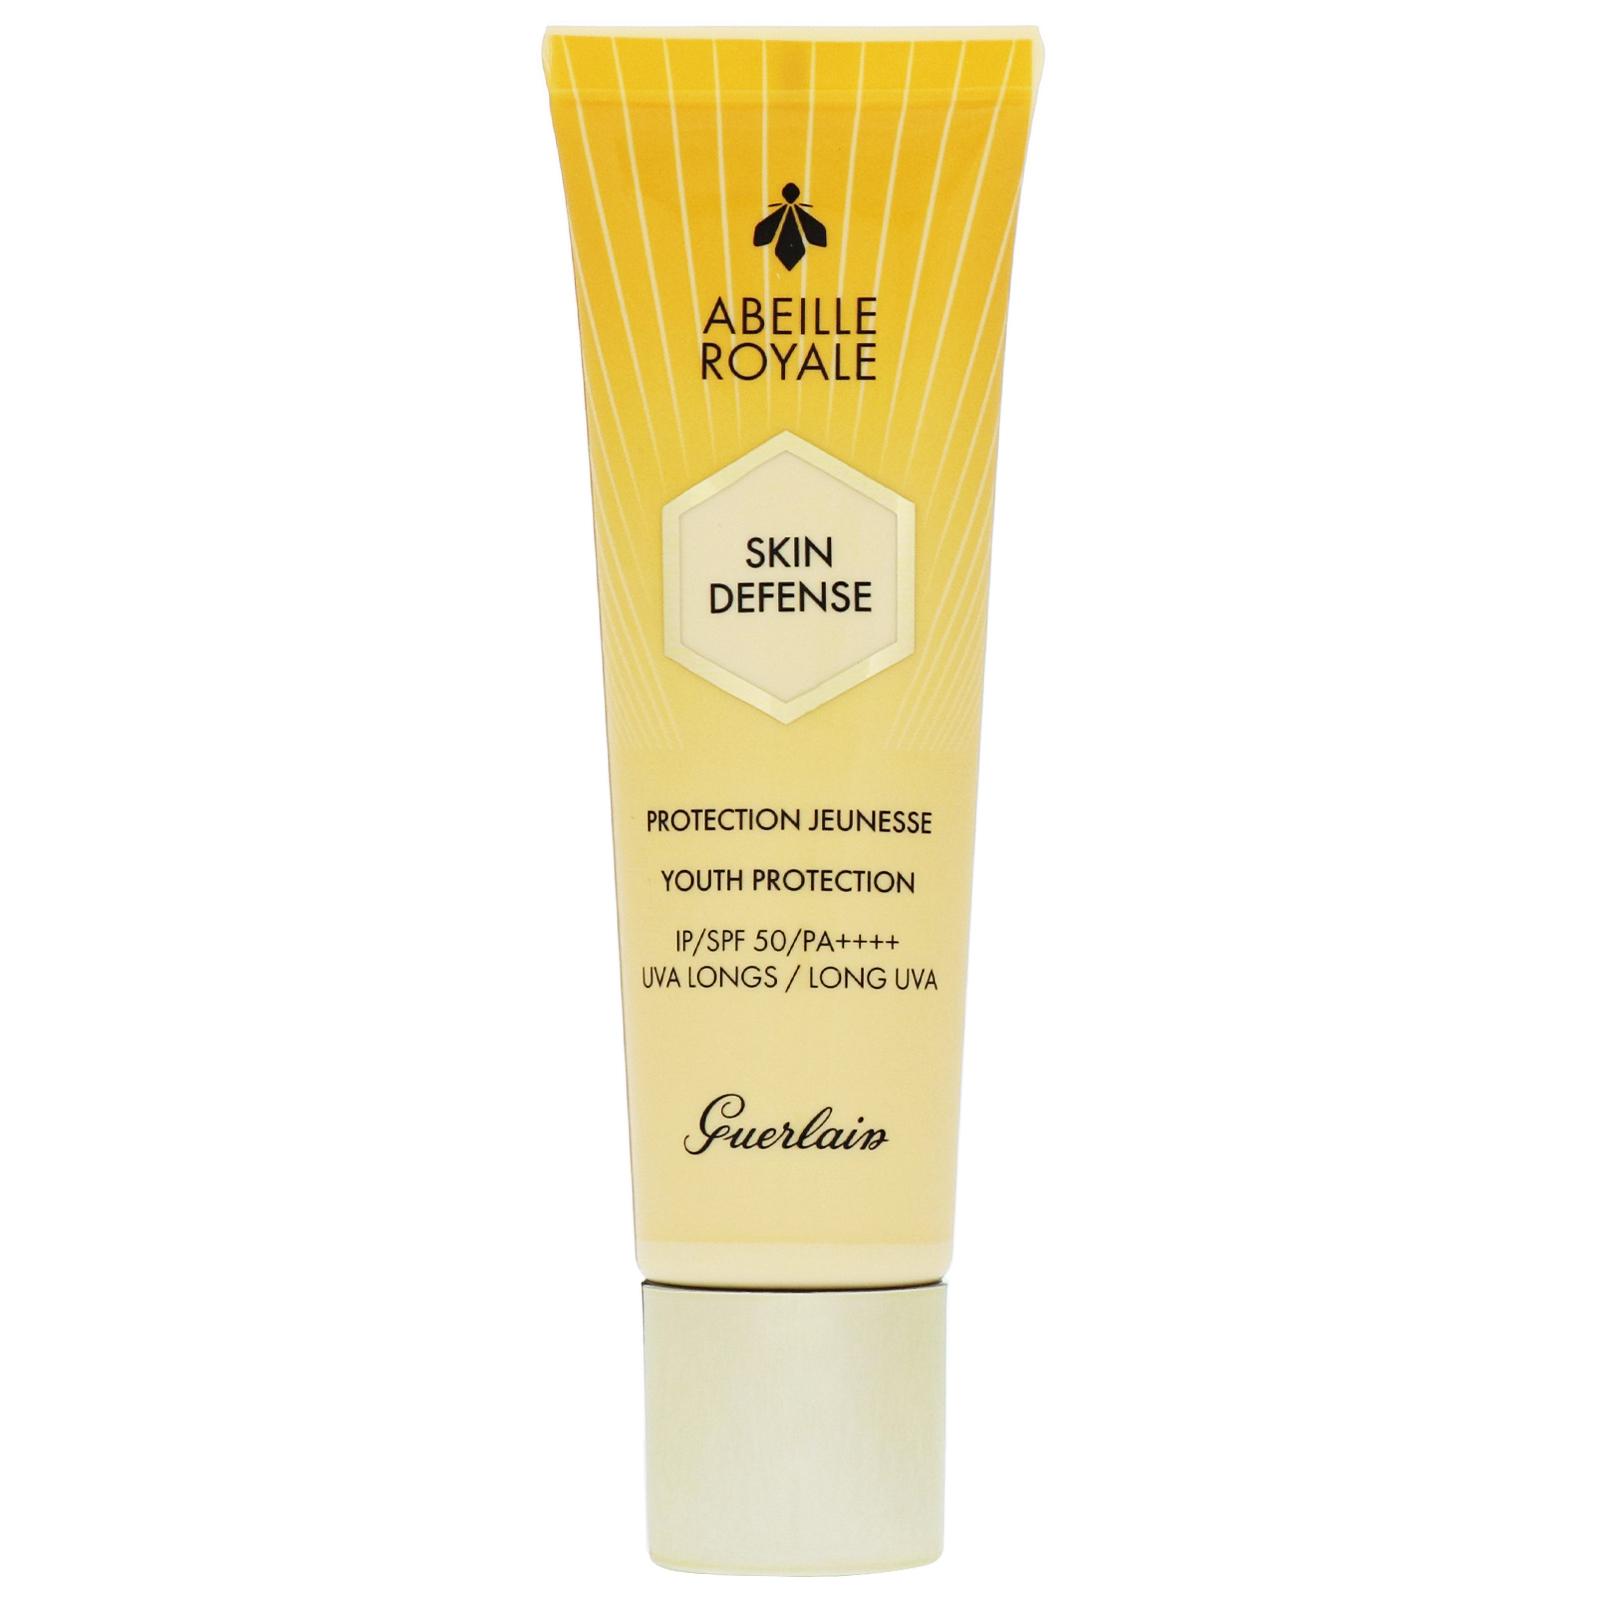 Abeille Royale Skin Defense Youth Protection SPF 50/PA++++